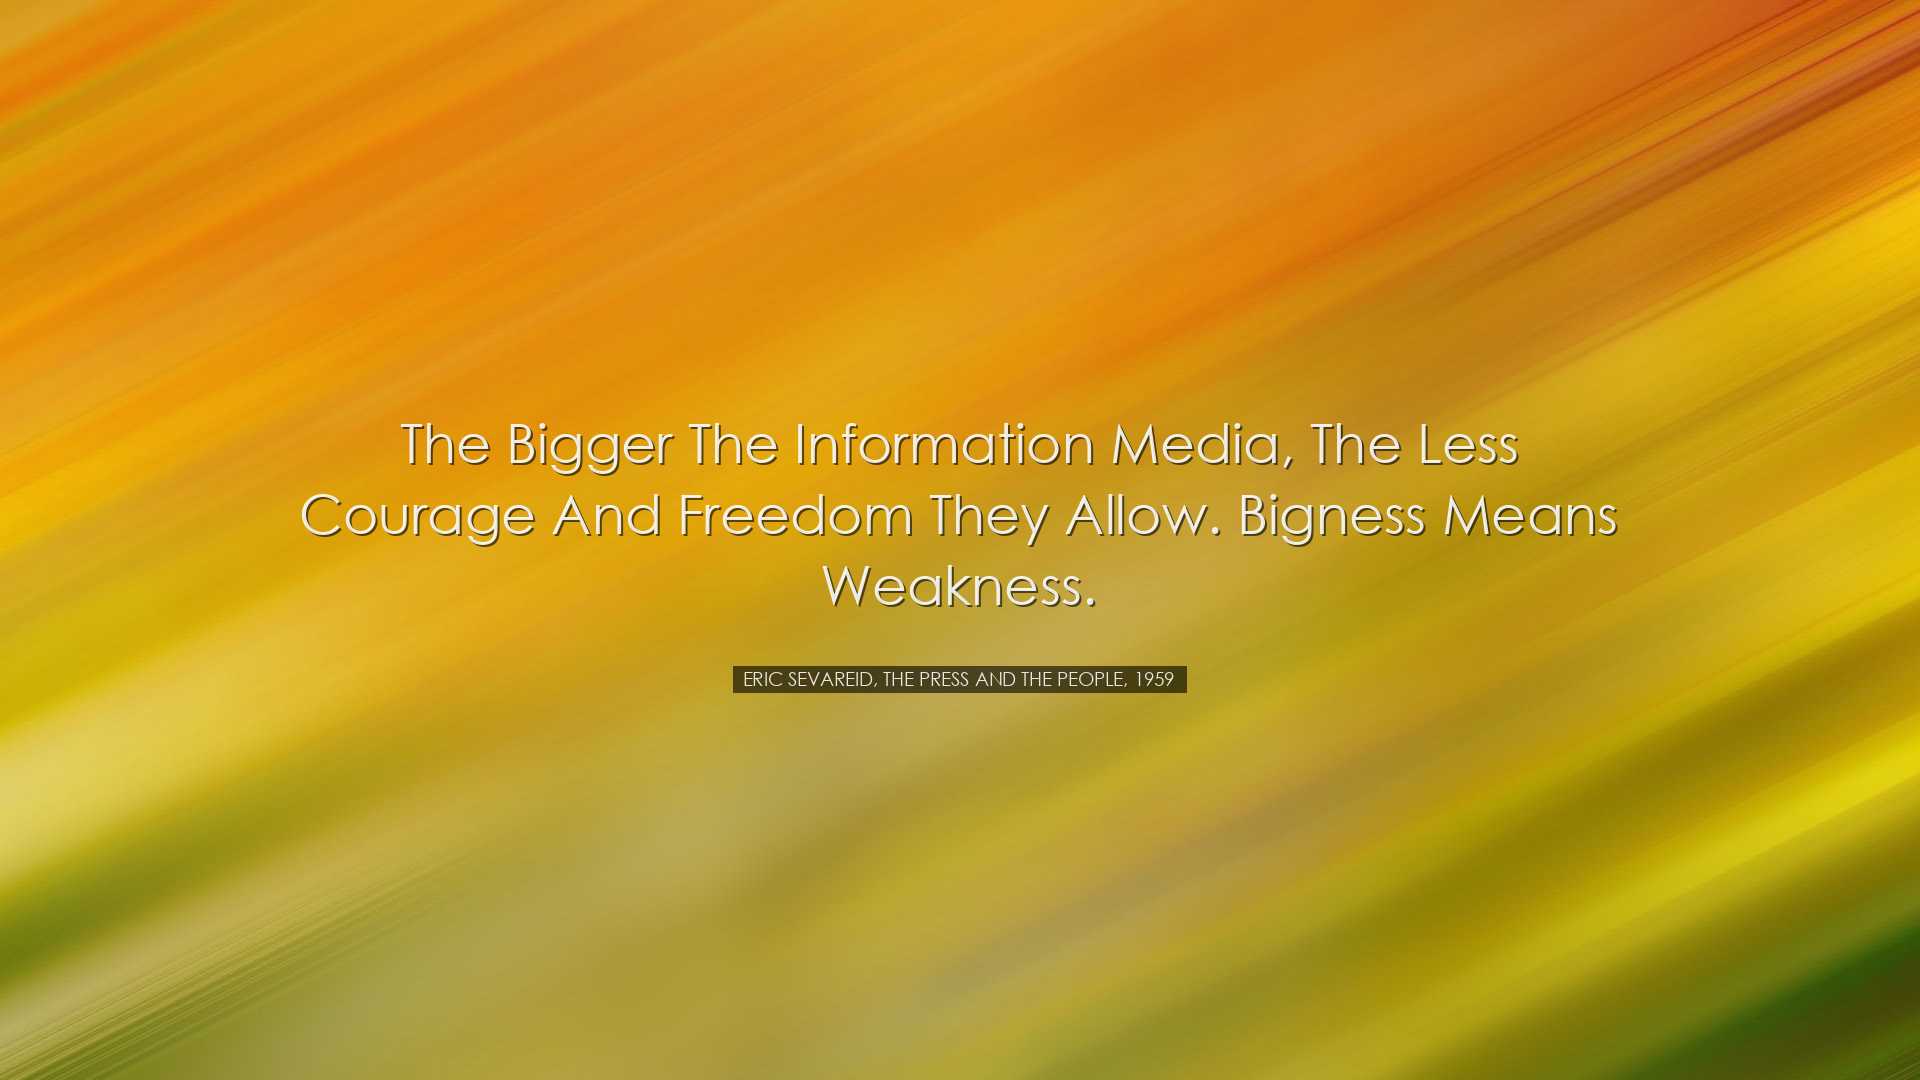 The bigger the information media, the less courage and freedom the